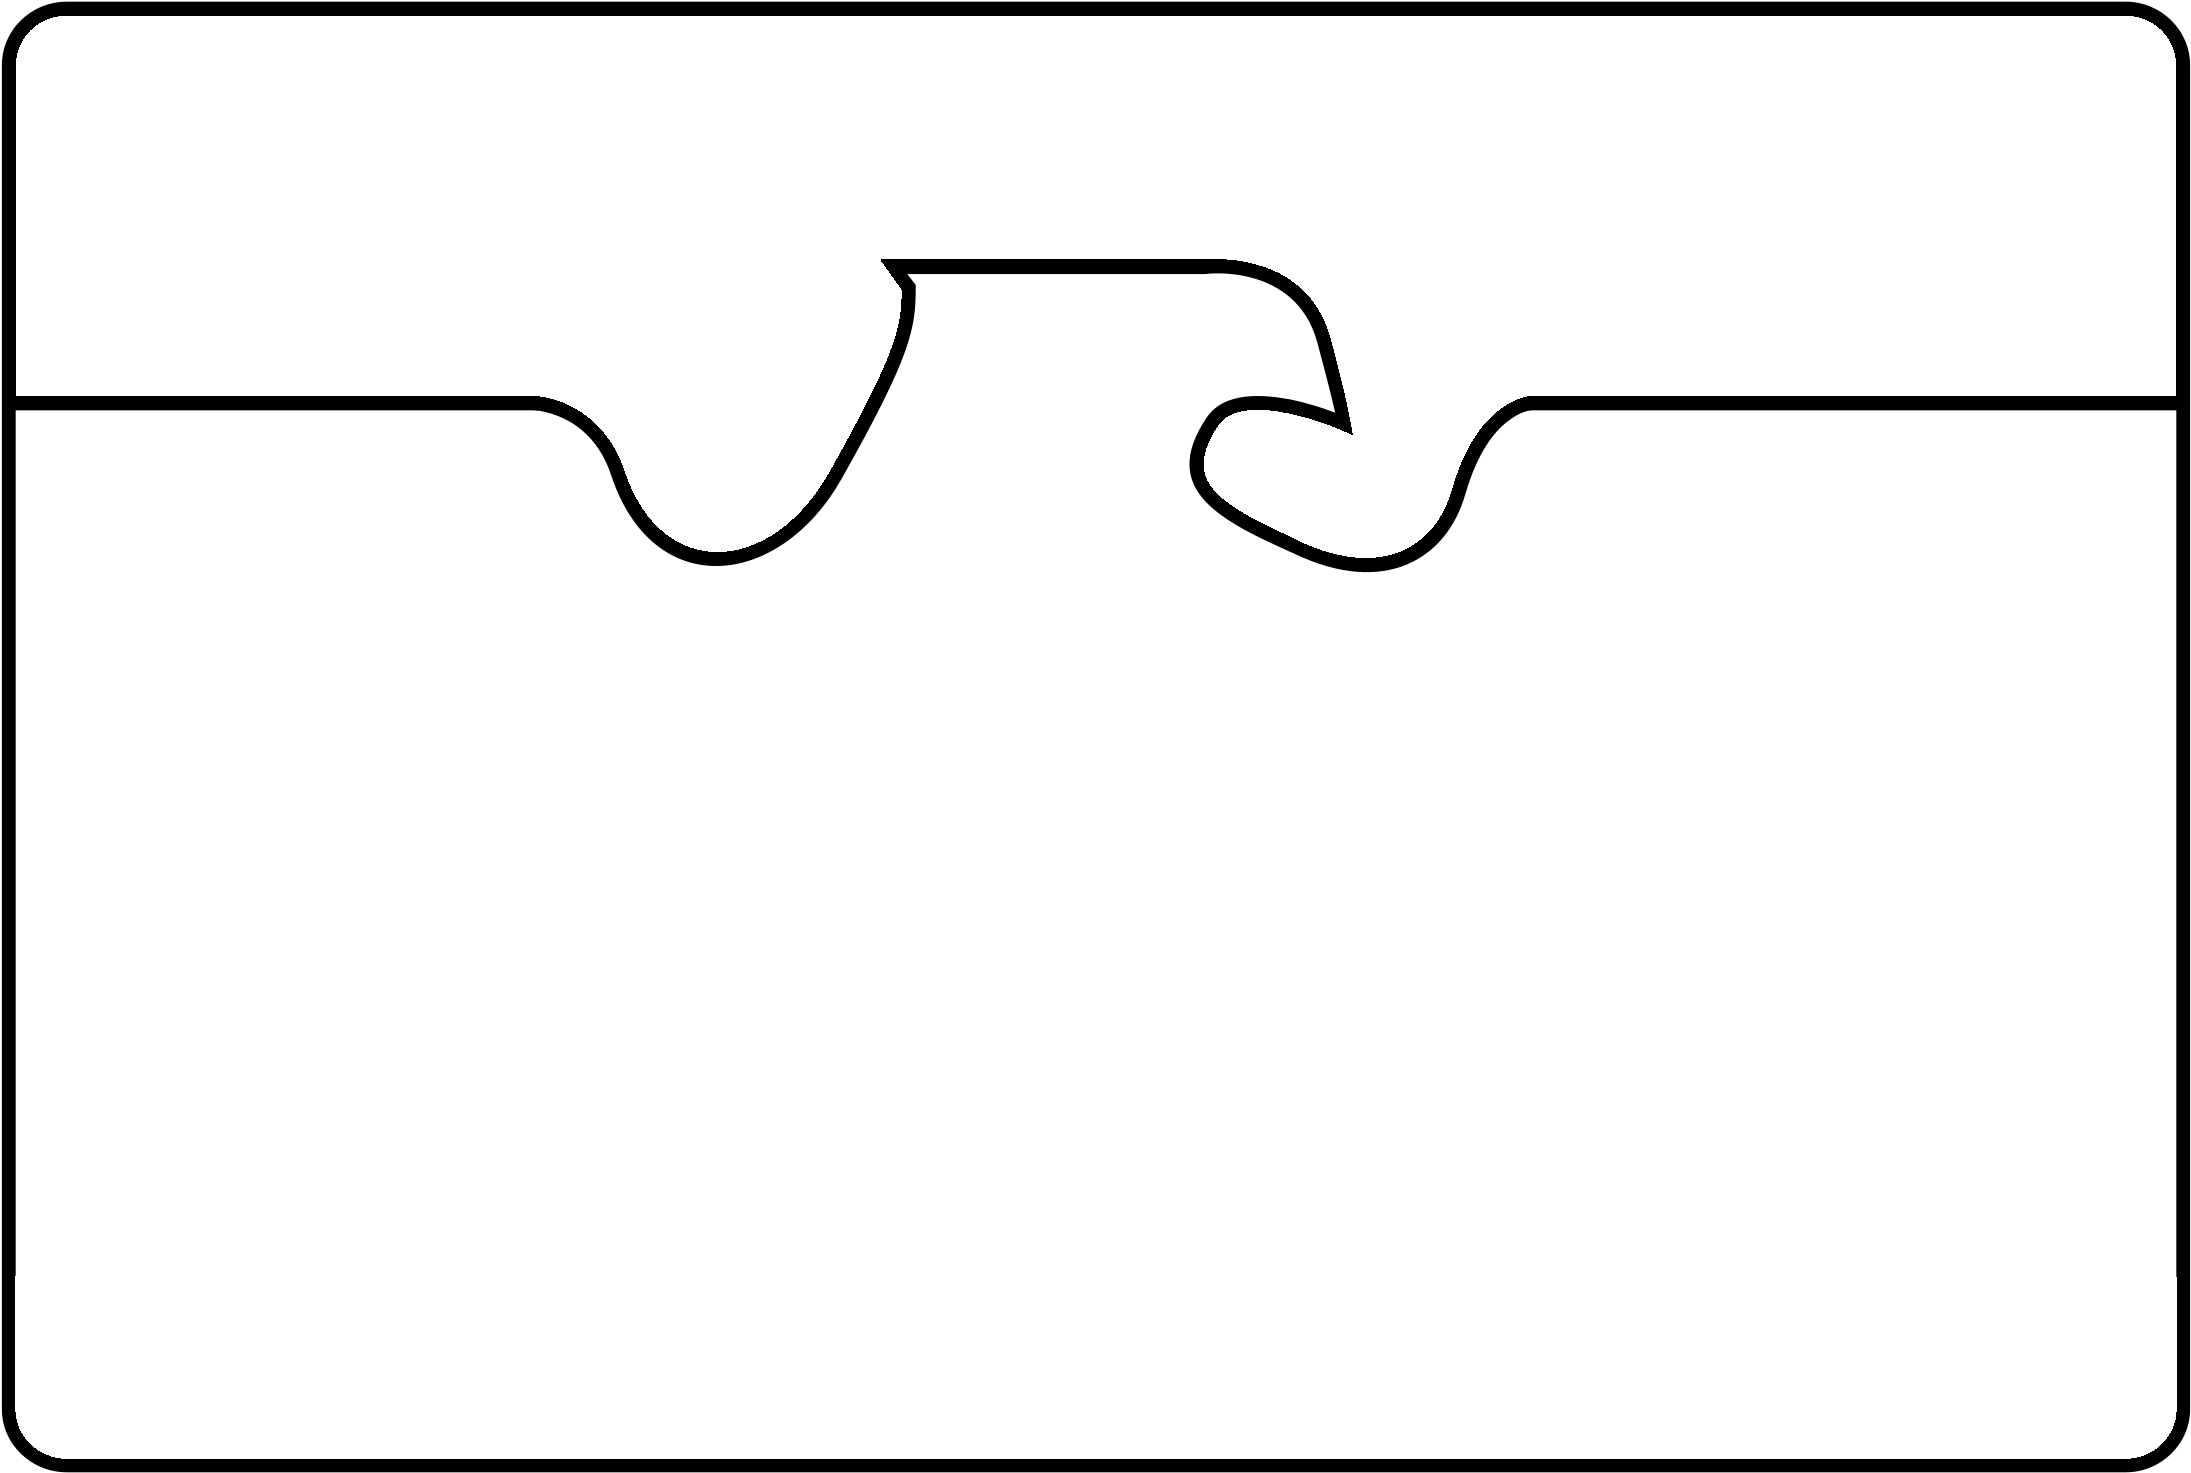 download tecate logo black and white line art png image with no background pngkey com download tecate logo black and white